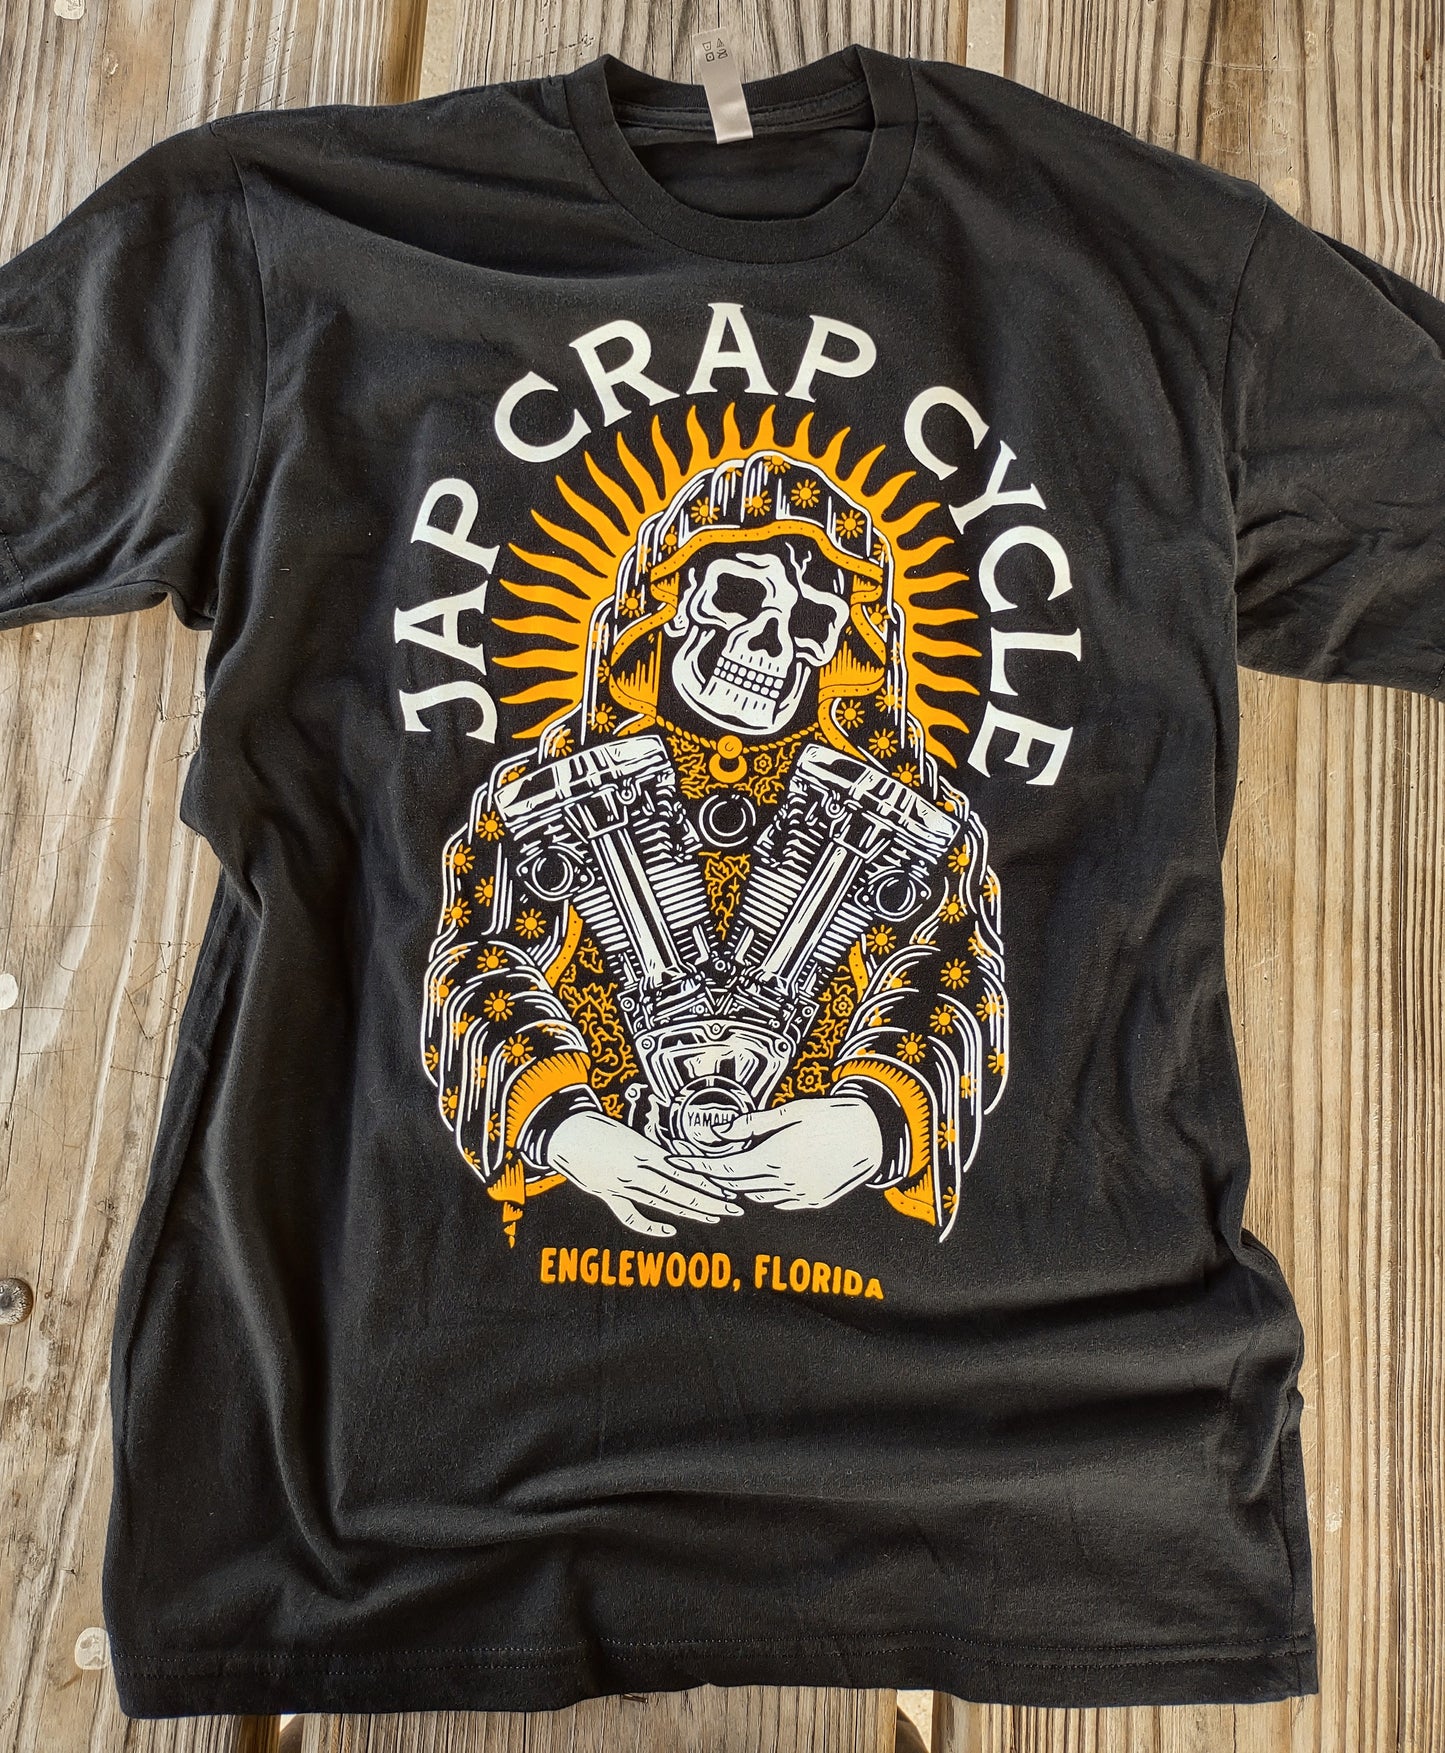 "Our Lady of Jap Crap" short sleeve shirt